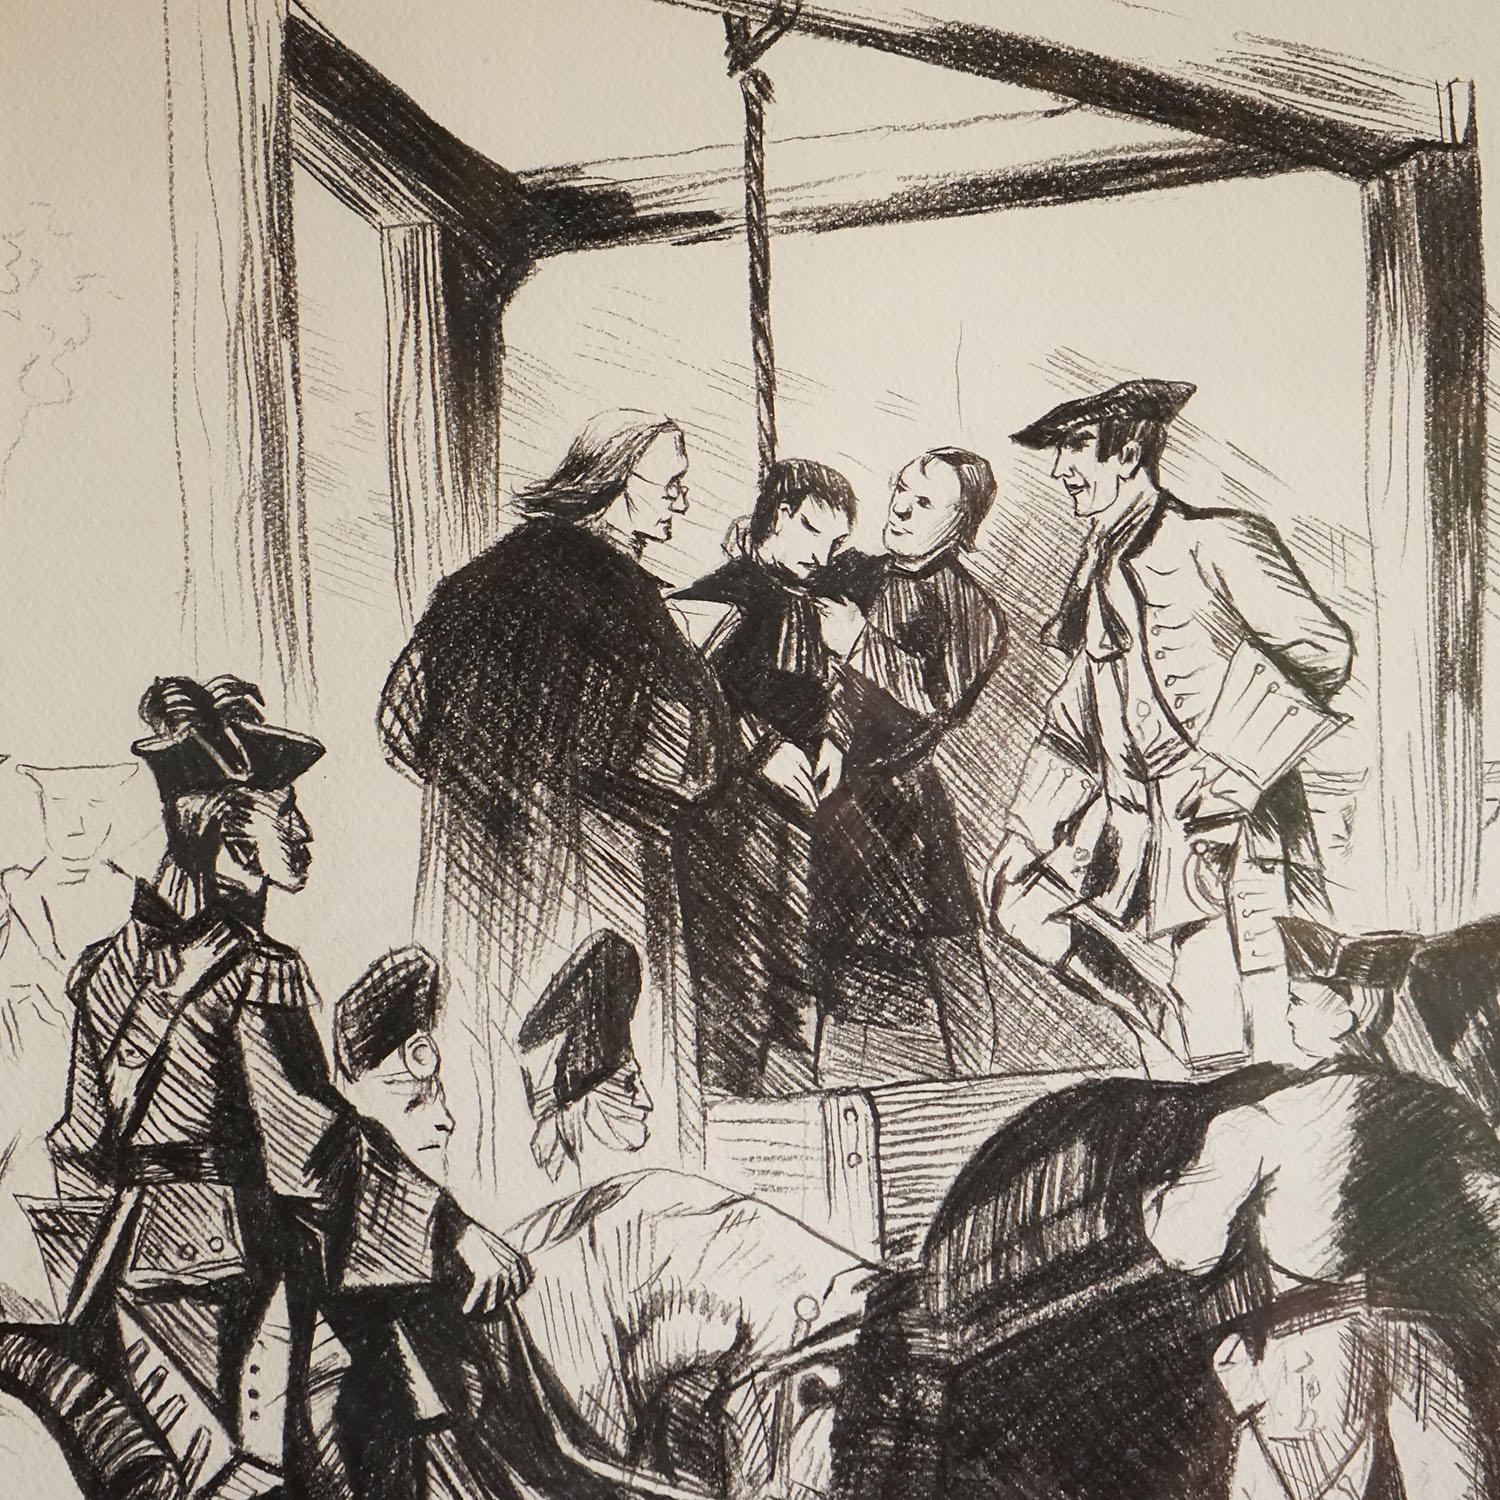 Vintage Original Pencil and Charcoal Study

Depicting a rather serious situation at the gallows, the victim of the hanging is being read his last rights with his head down and eyes closed in anticipation. The is a crowd in front of him gathering